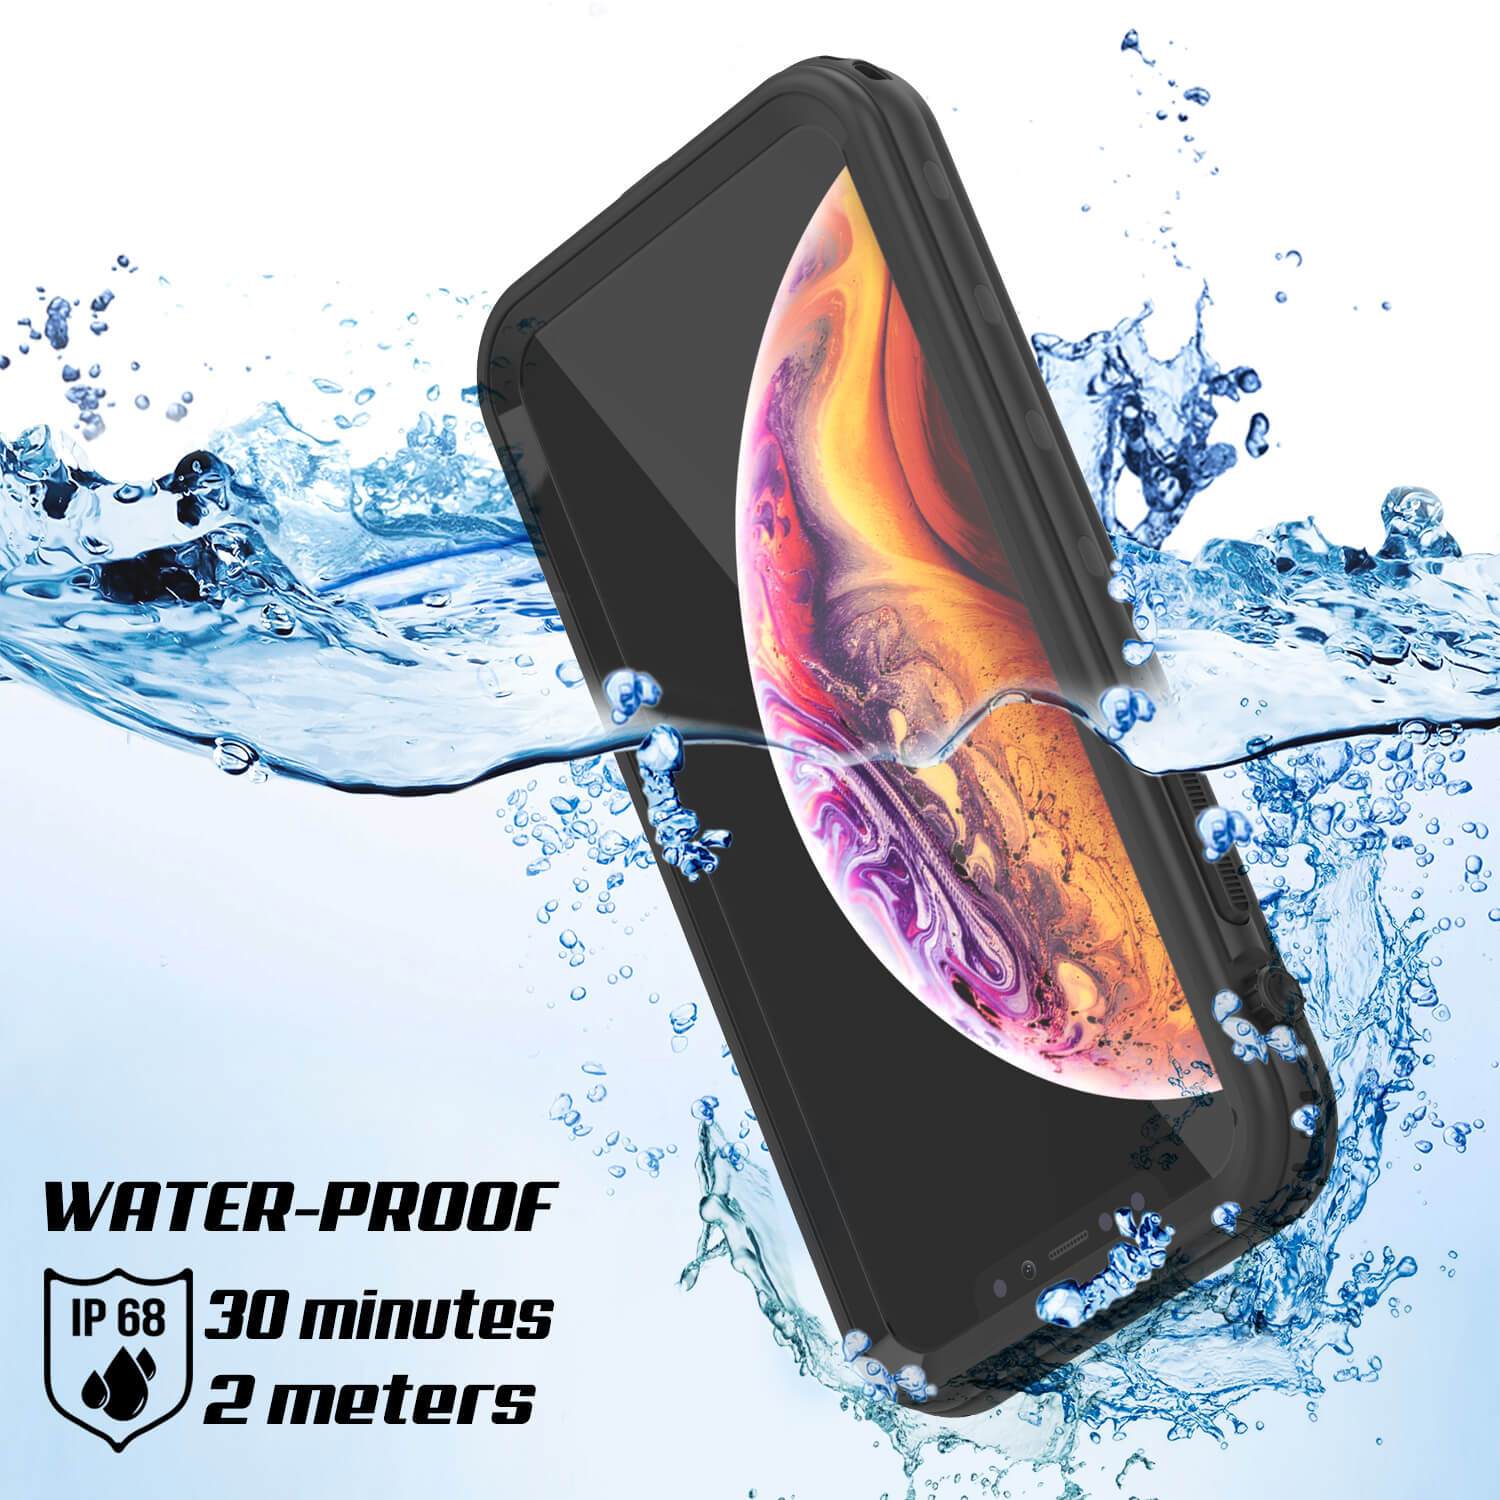 iPhone Xs Max Waterproof Case, Punkcase [Extreme Series] Armor Cover w/ Built in Screen Protector [Black]